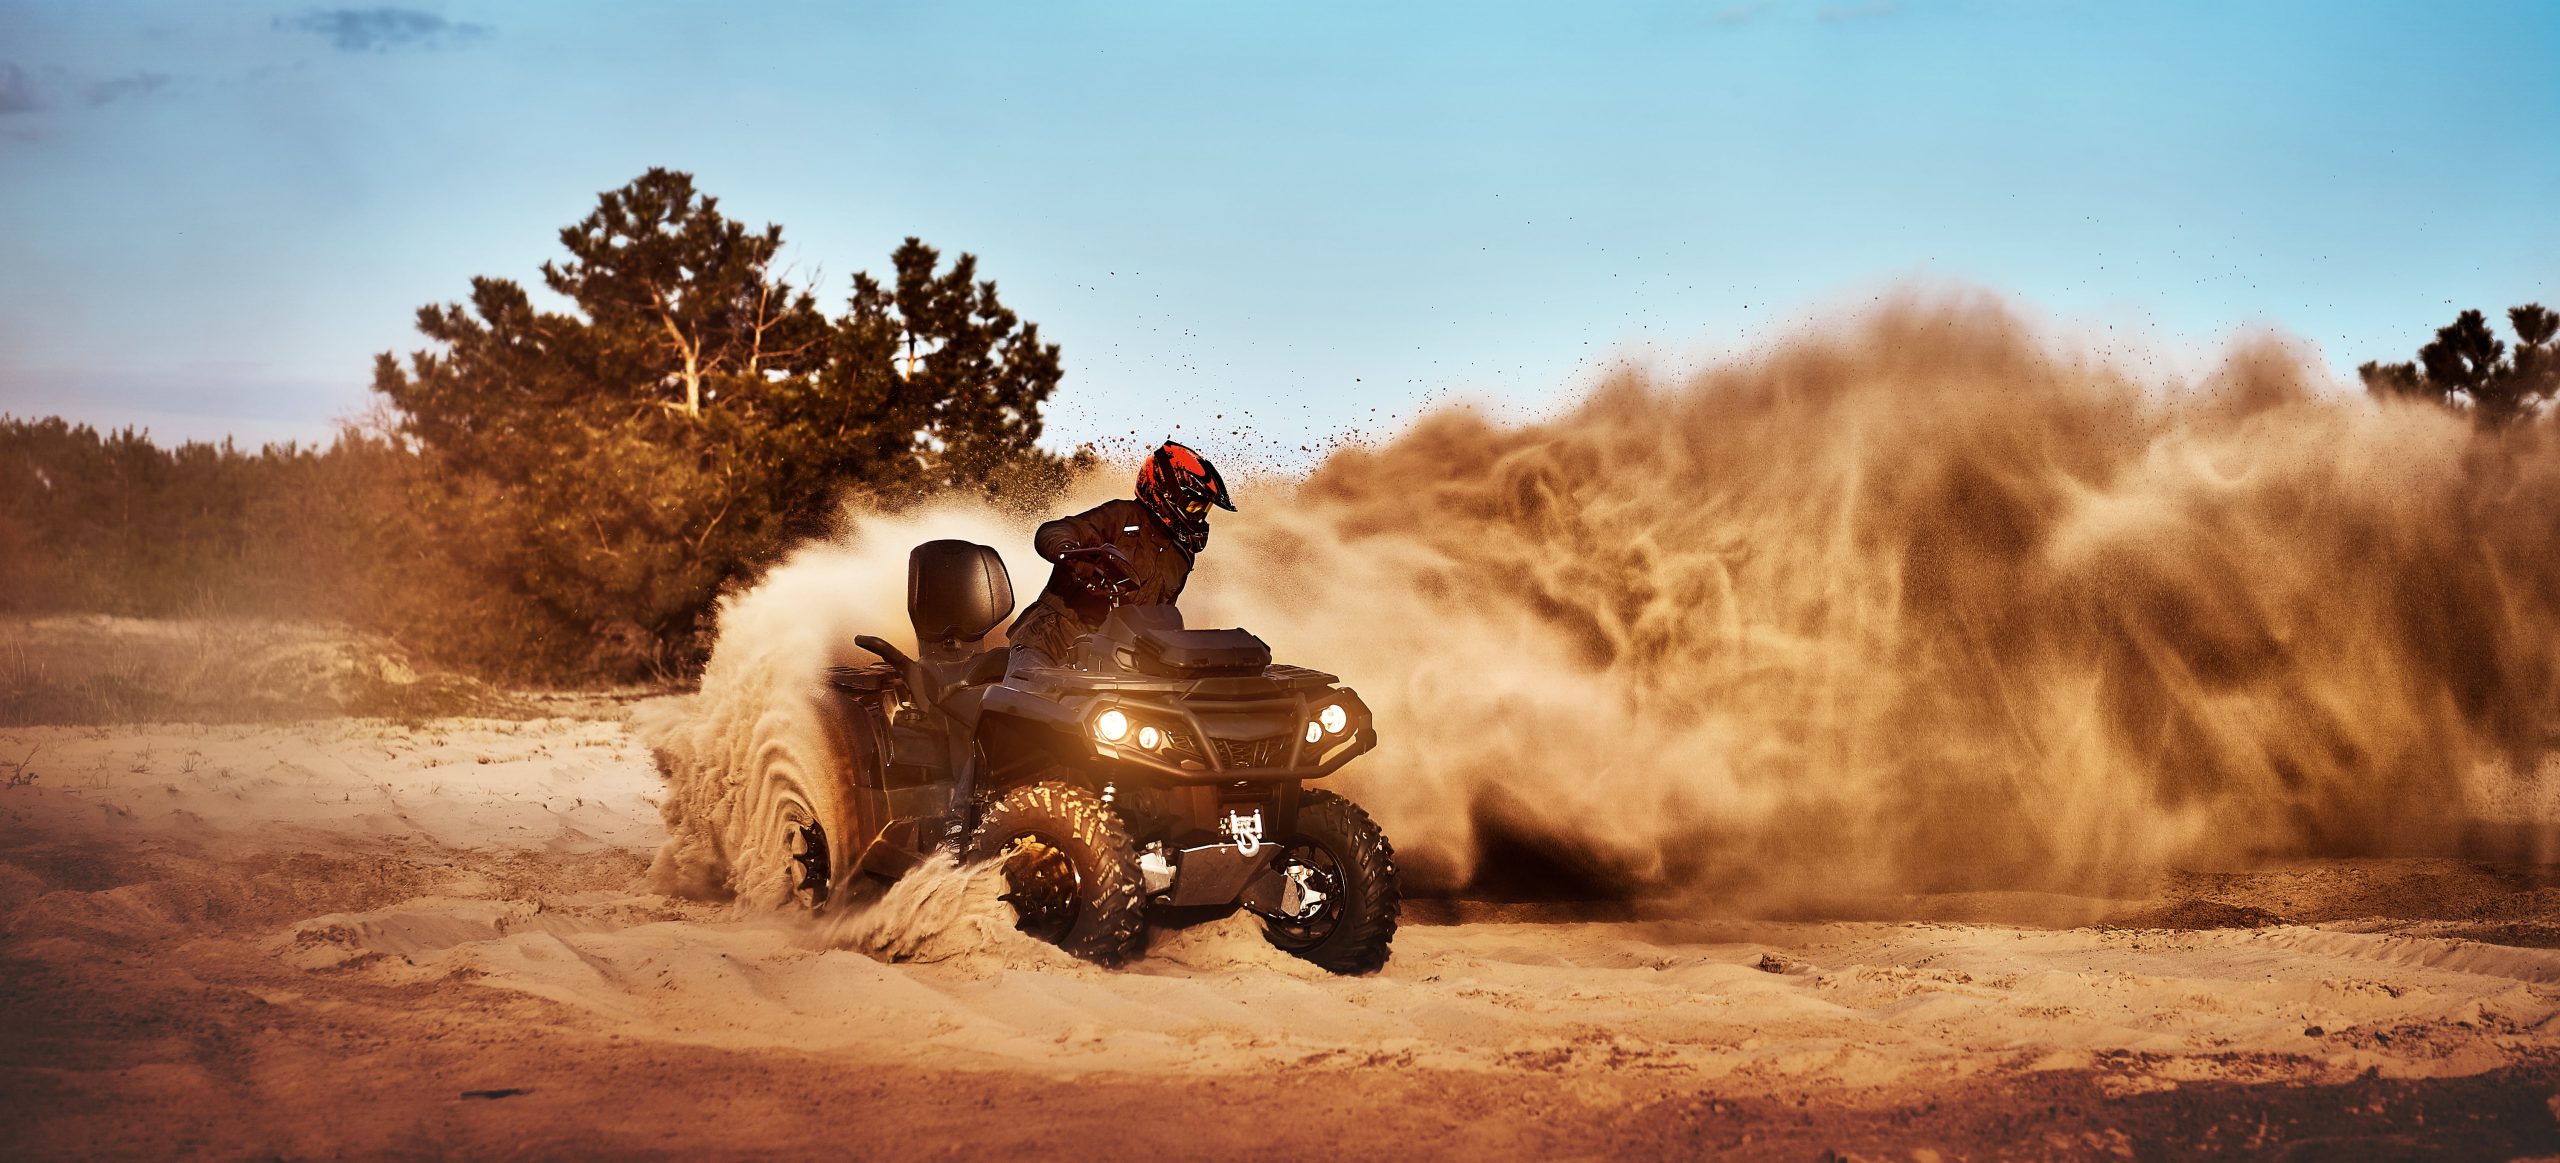 Custom Outdoor Adventure ATV’s (Custom Quads & Side-By-Sides) In Anacortes